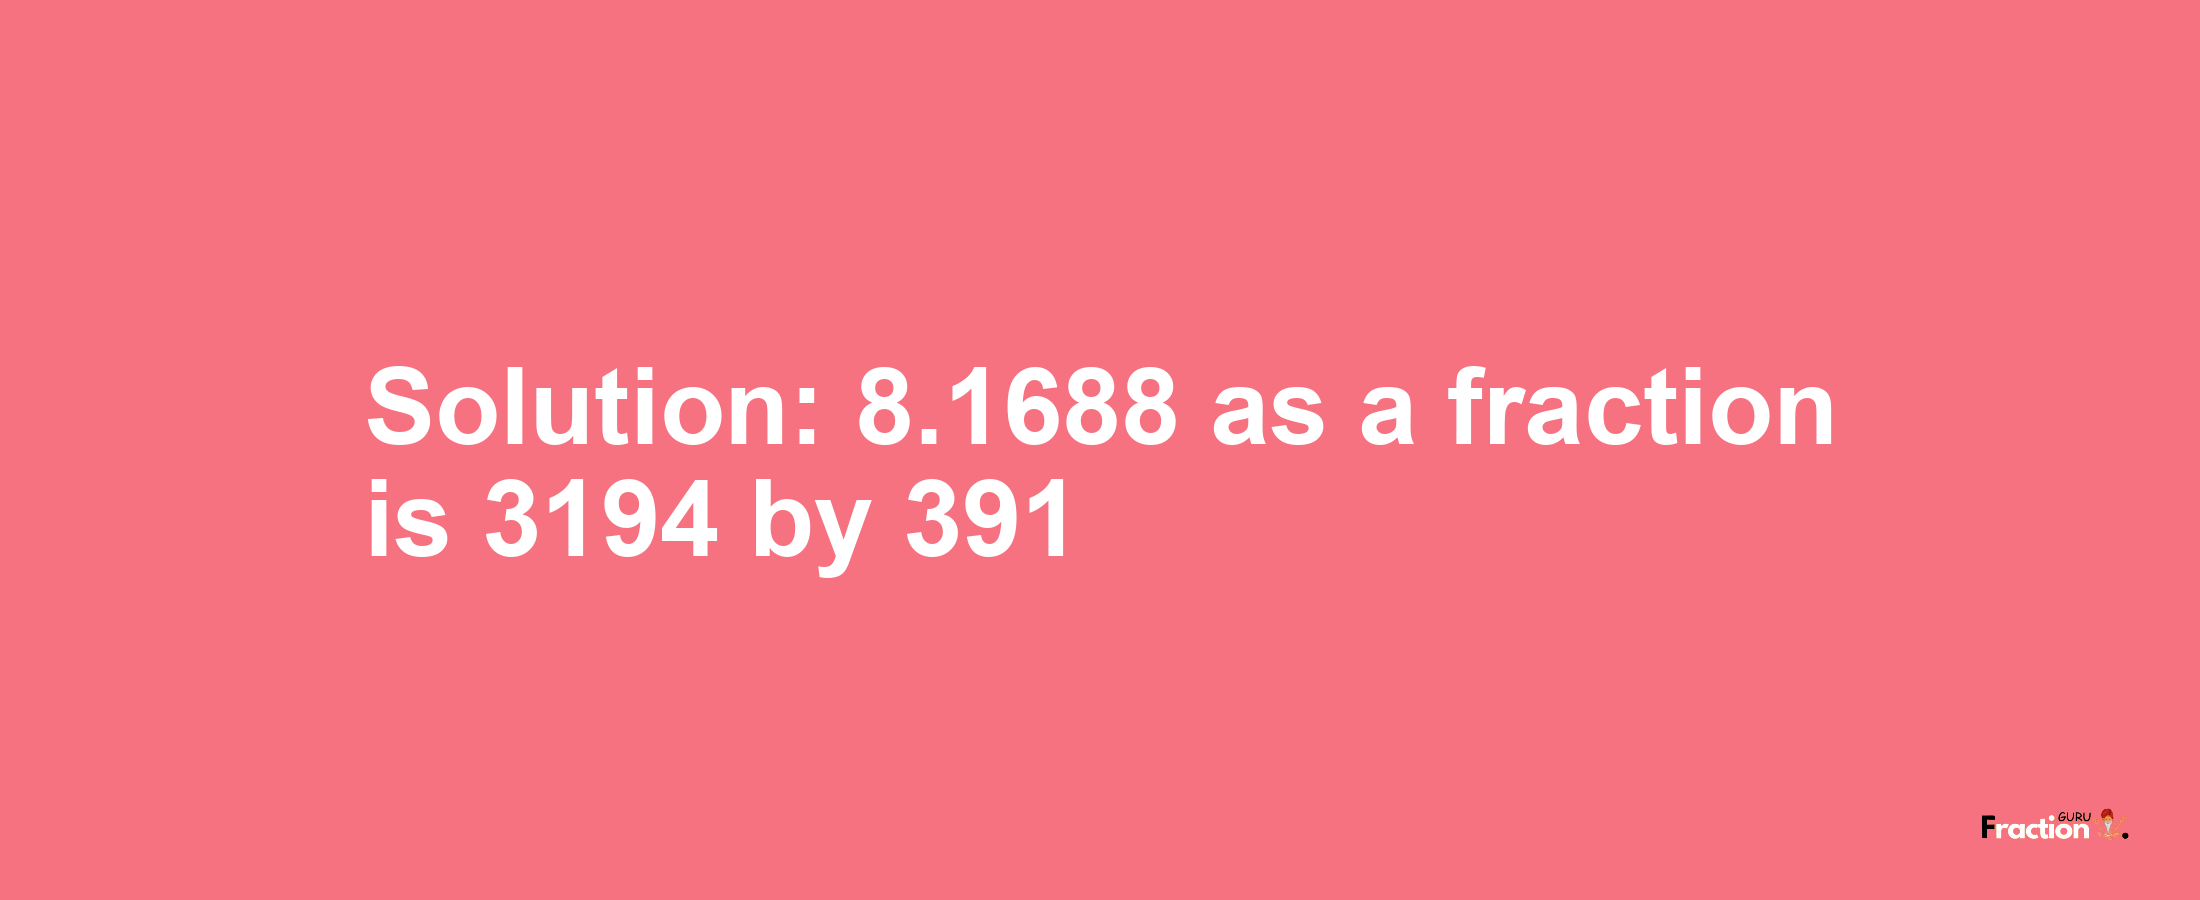 Solution:8.1688 as a fraction is 3194/391